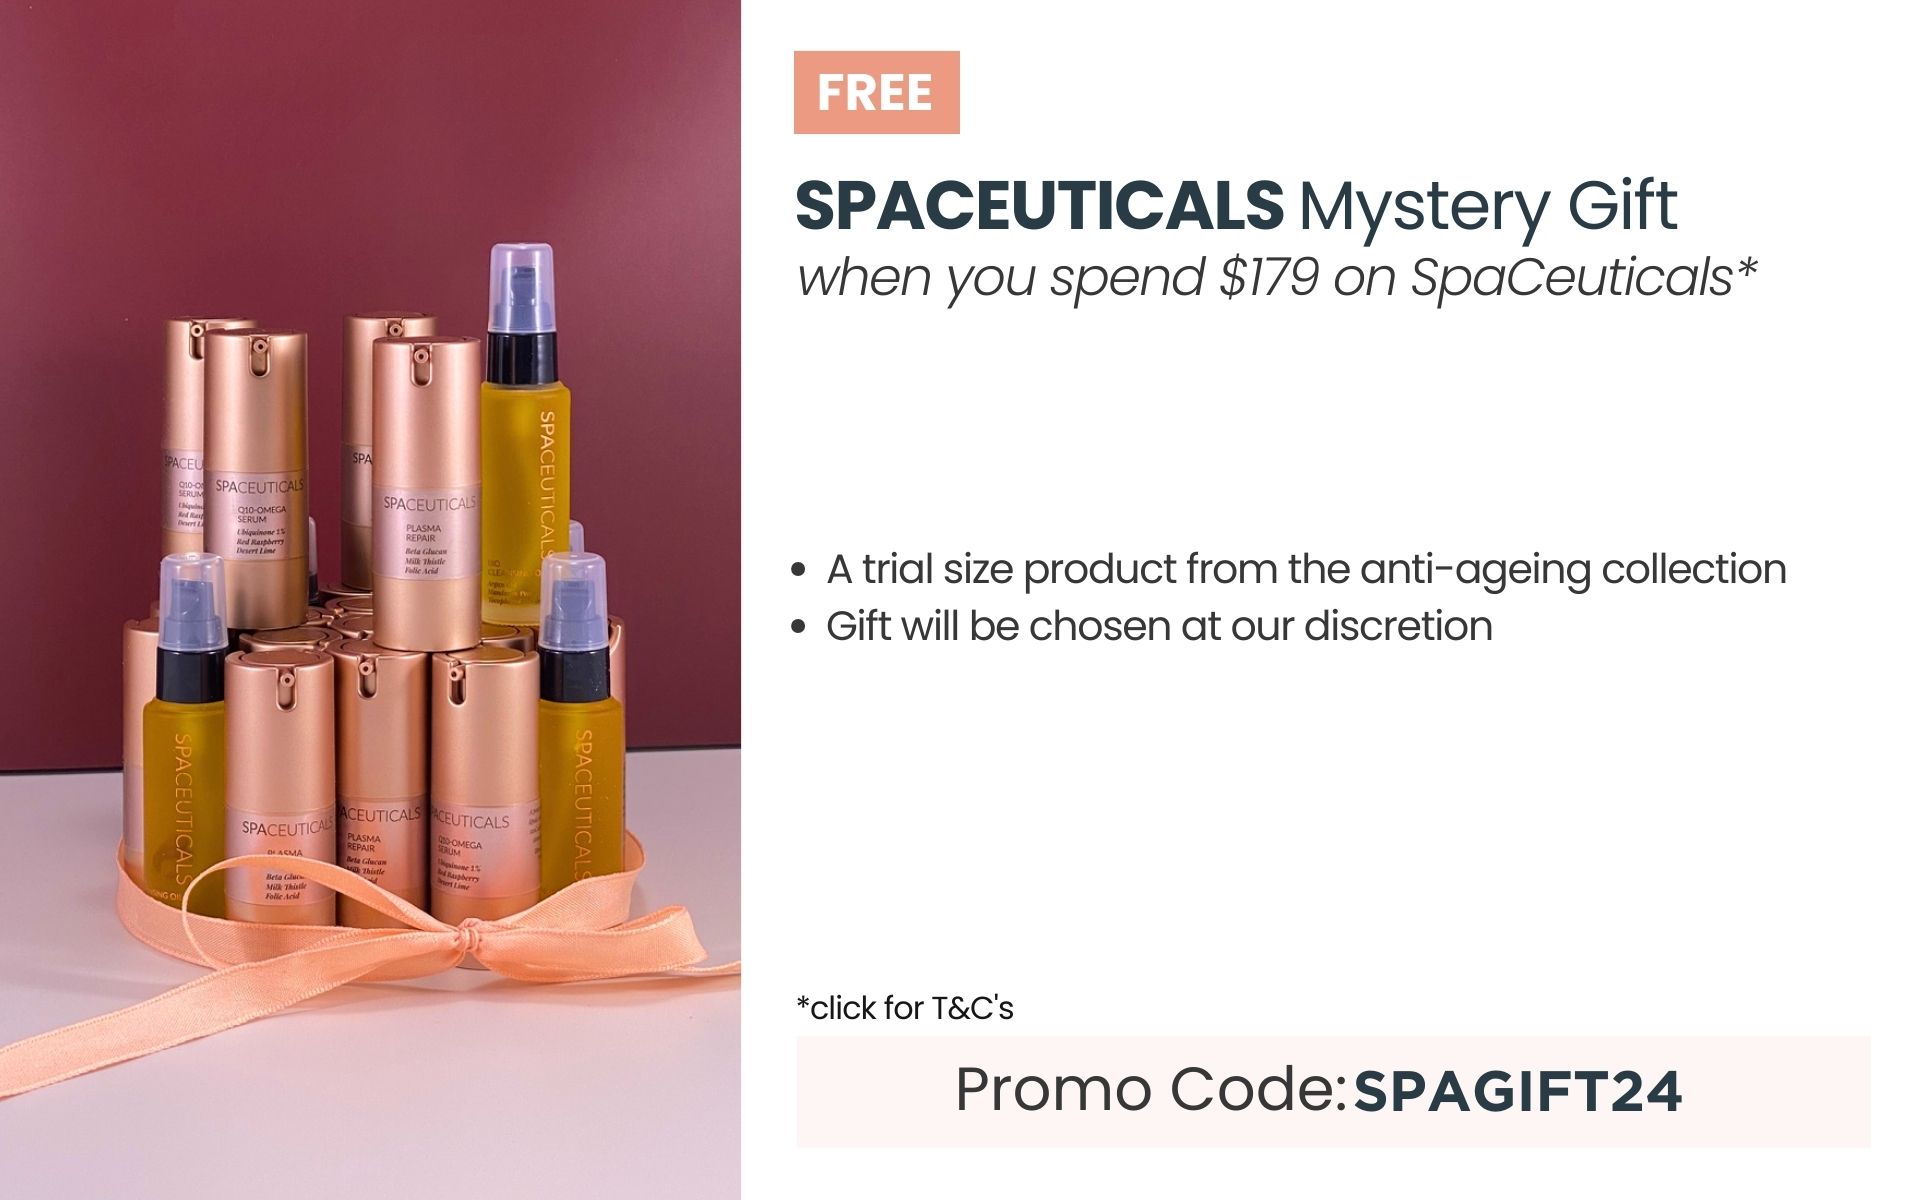 FREE SpaCeuticals Mystery Gift when you spend $179 on SpaCeuticals. Use promo code SPAGIFT24.